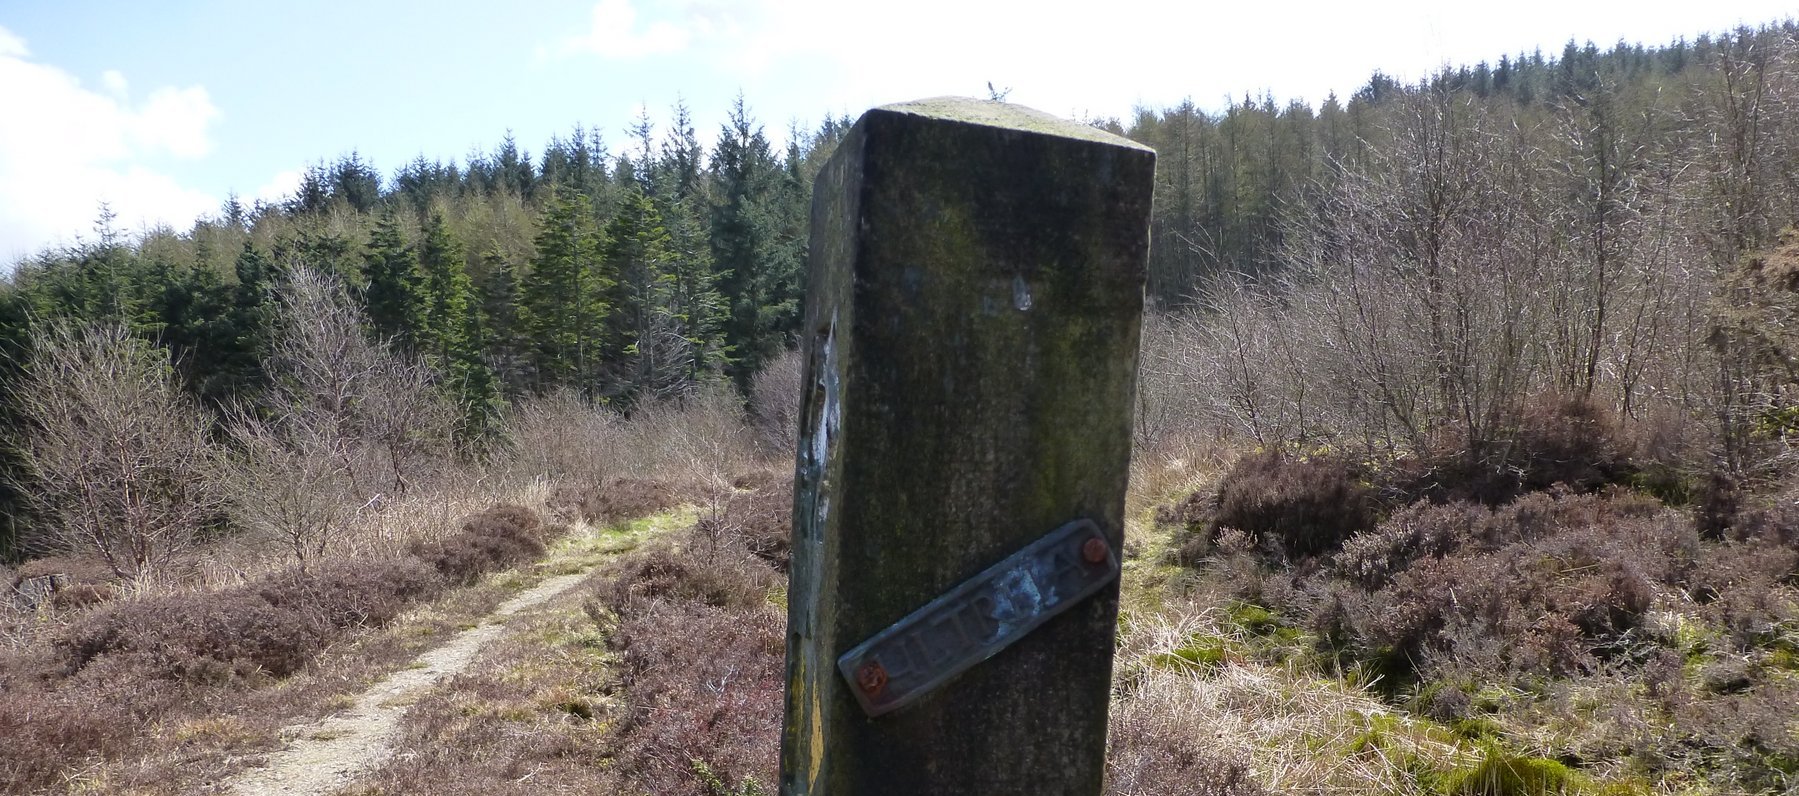 The ‘Ultreia’ plaque on this post means a kist is nearby!